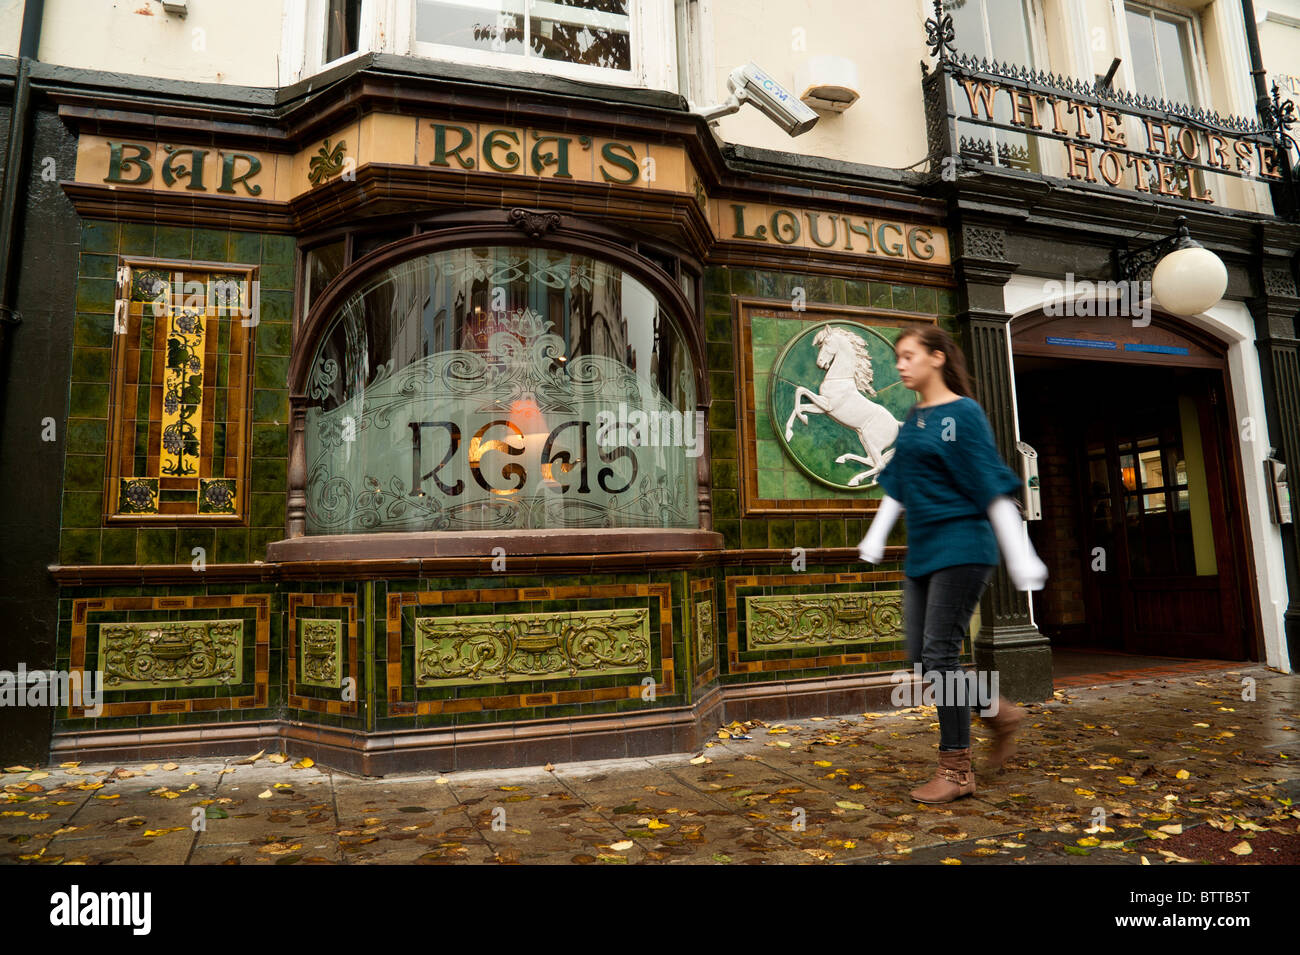 The old Victorian tiled frontage and engraved window of Rea's Bar lounge Aberystwyth Wales UK Stock Photo